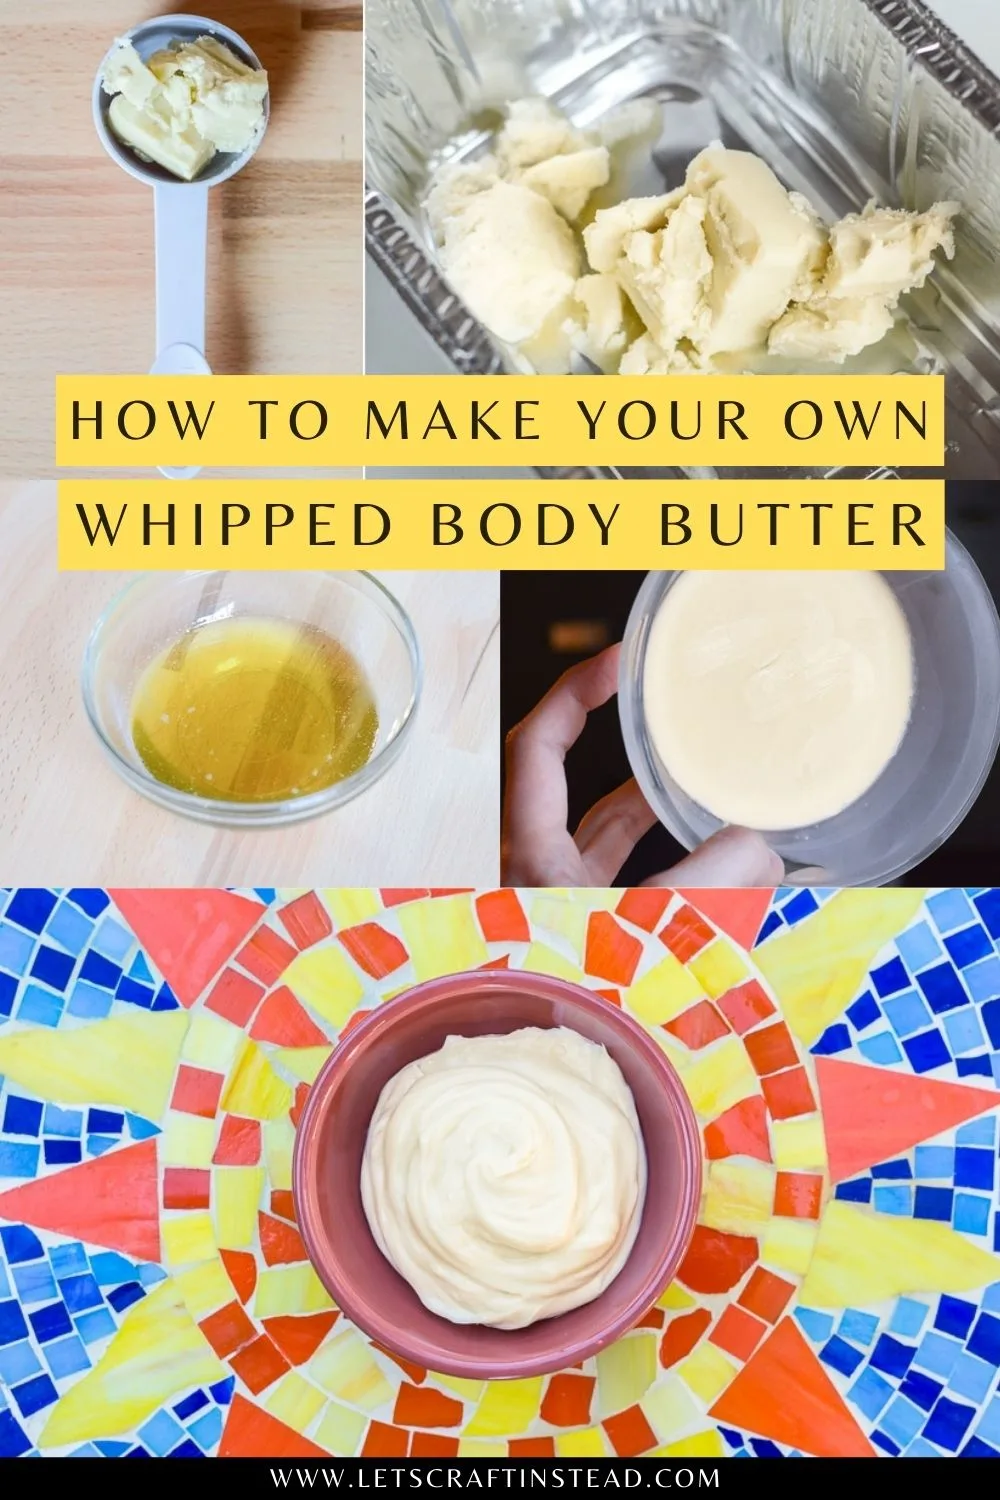 pinnable graphic about how to make whipped body butter with text overlay